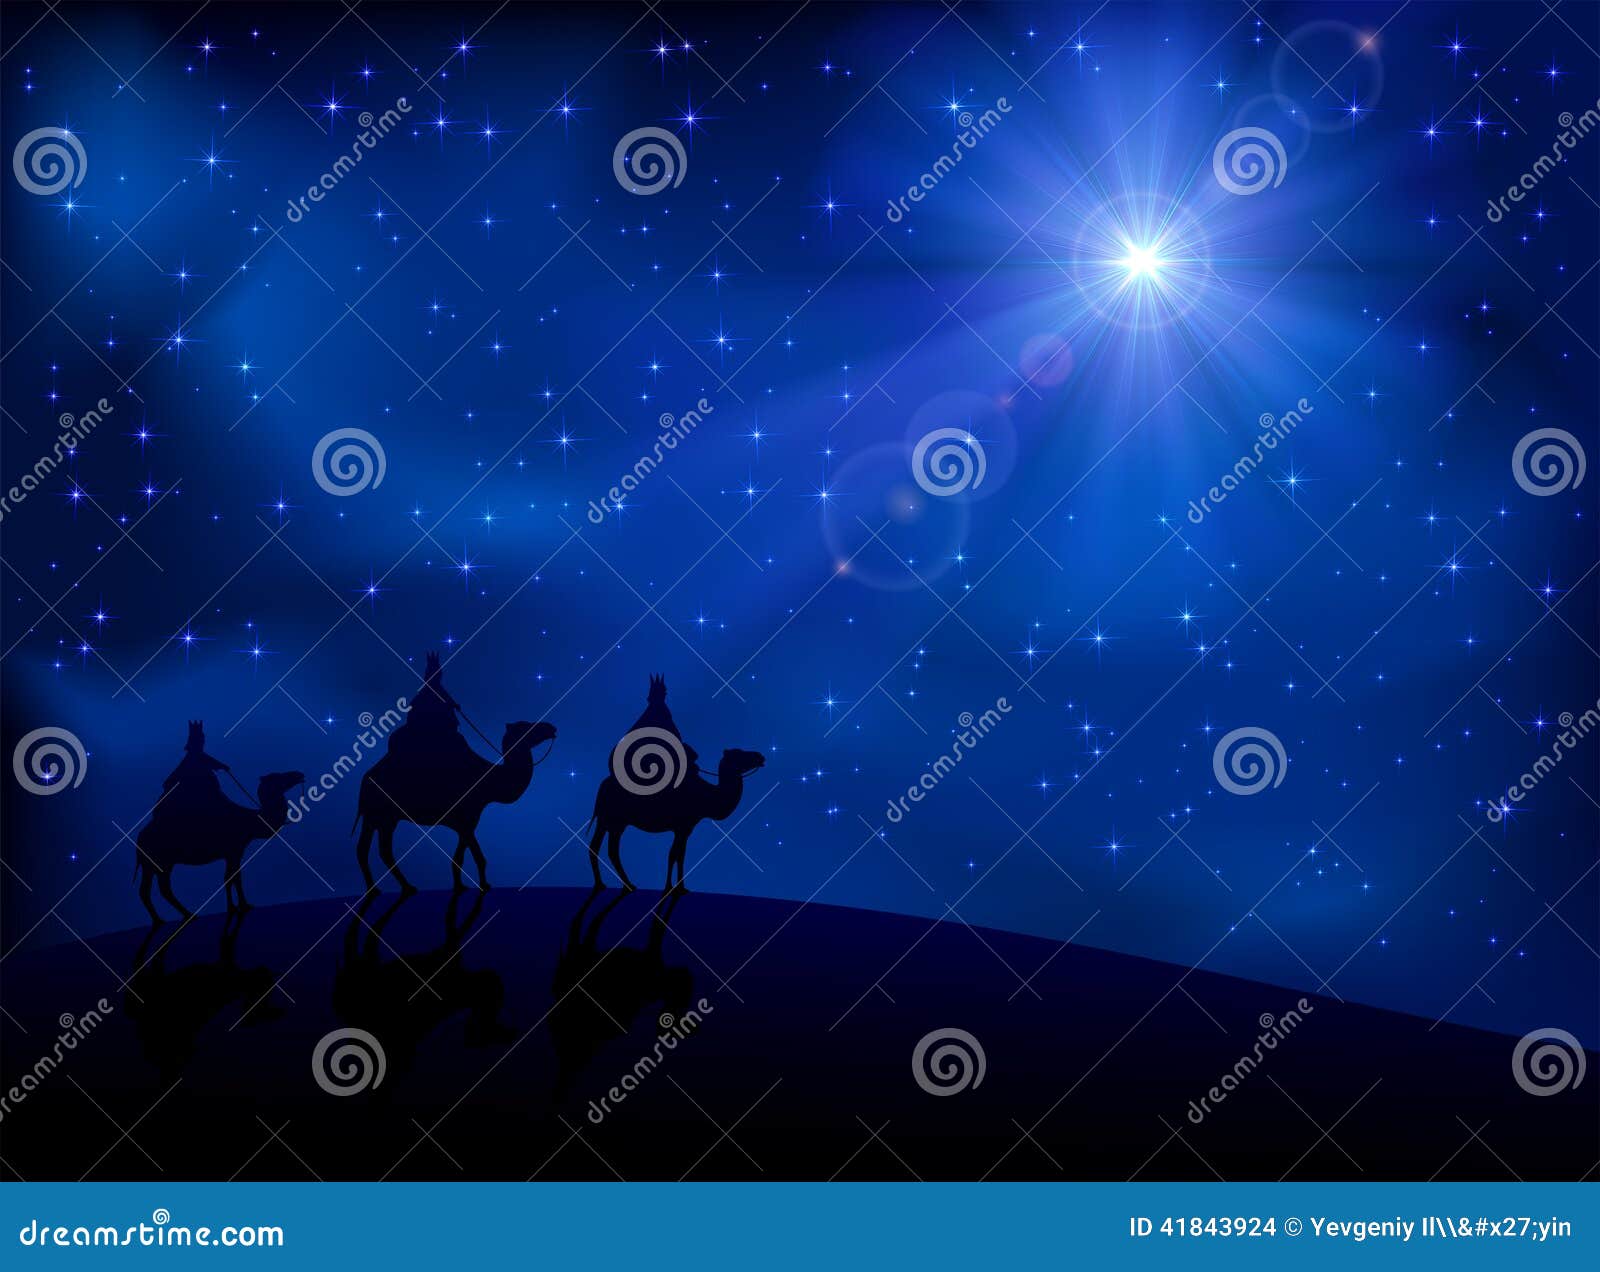 three wise men and star